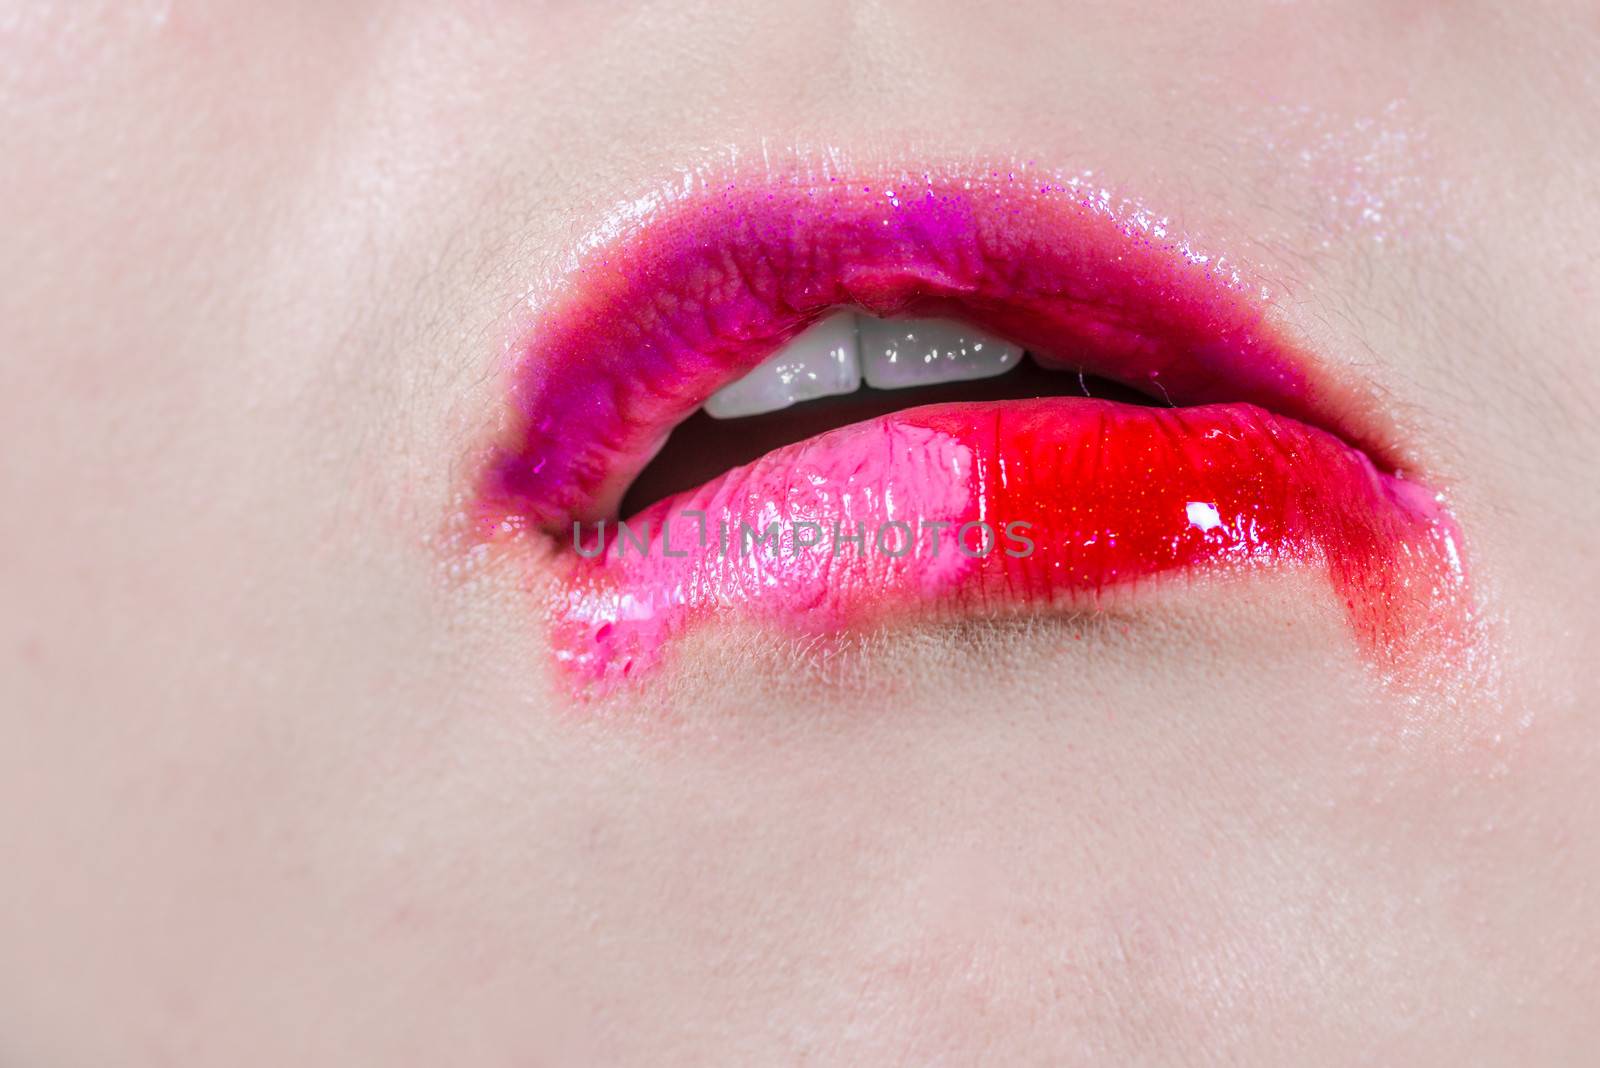 Lips with smeared lipsticks by IVYPHOTOS